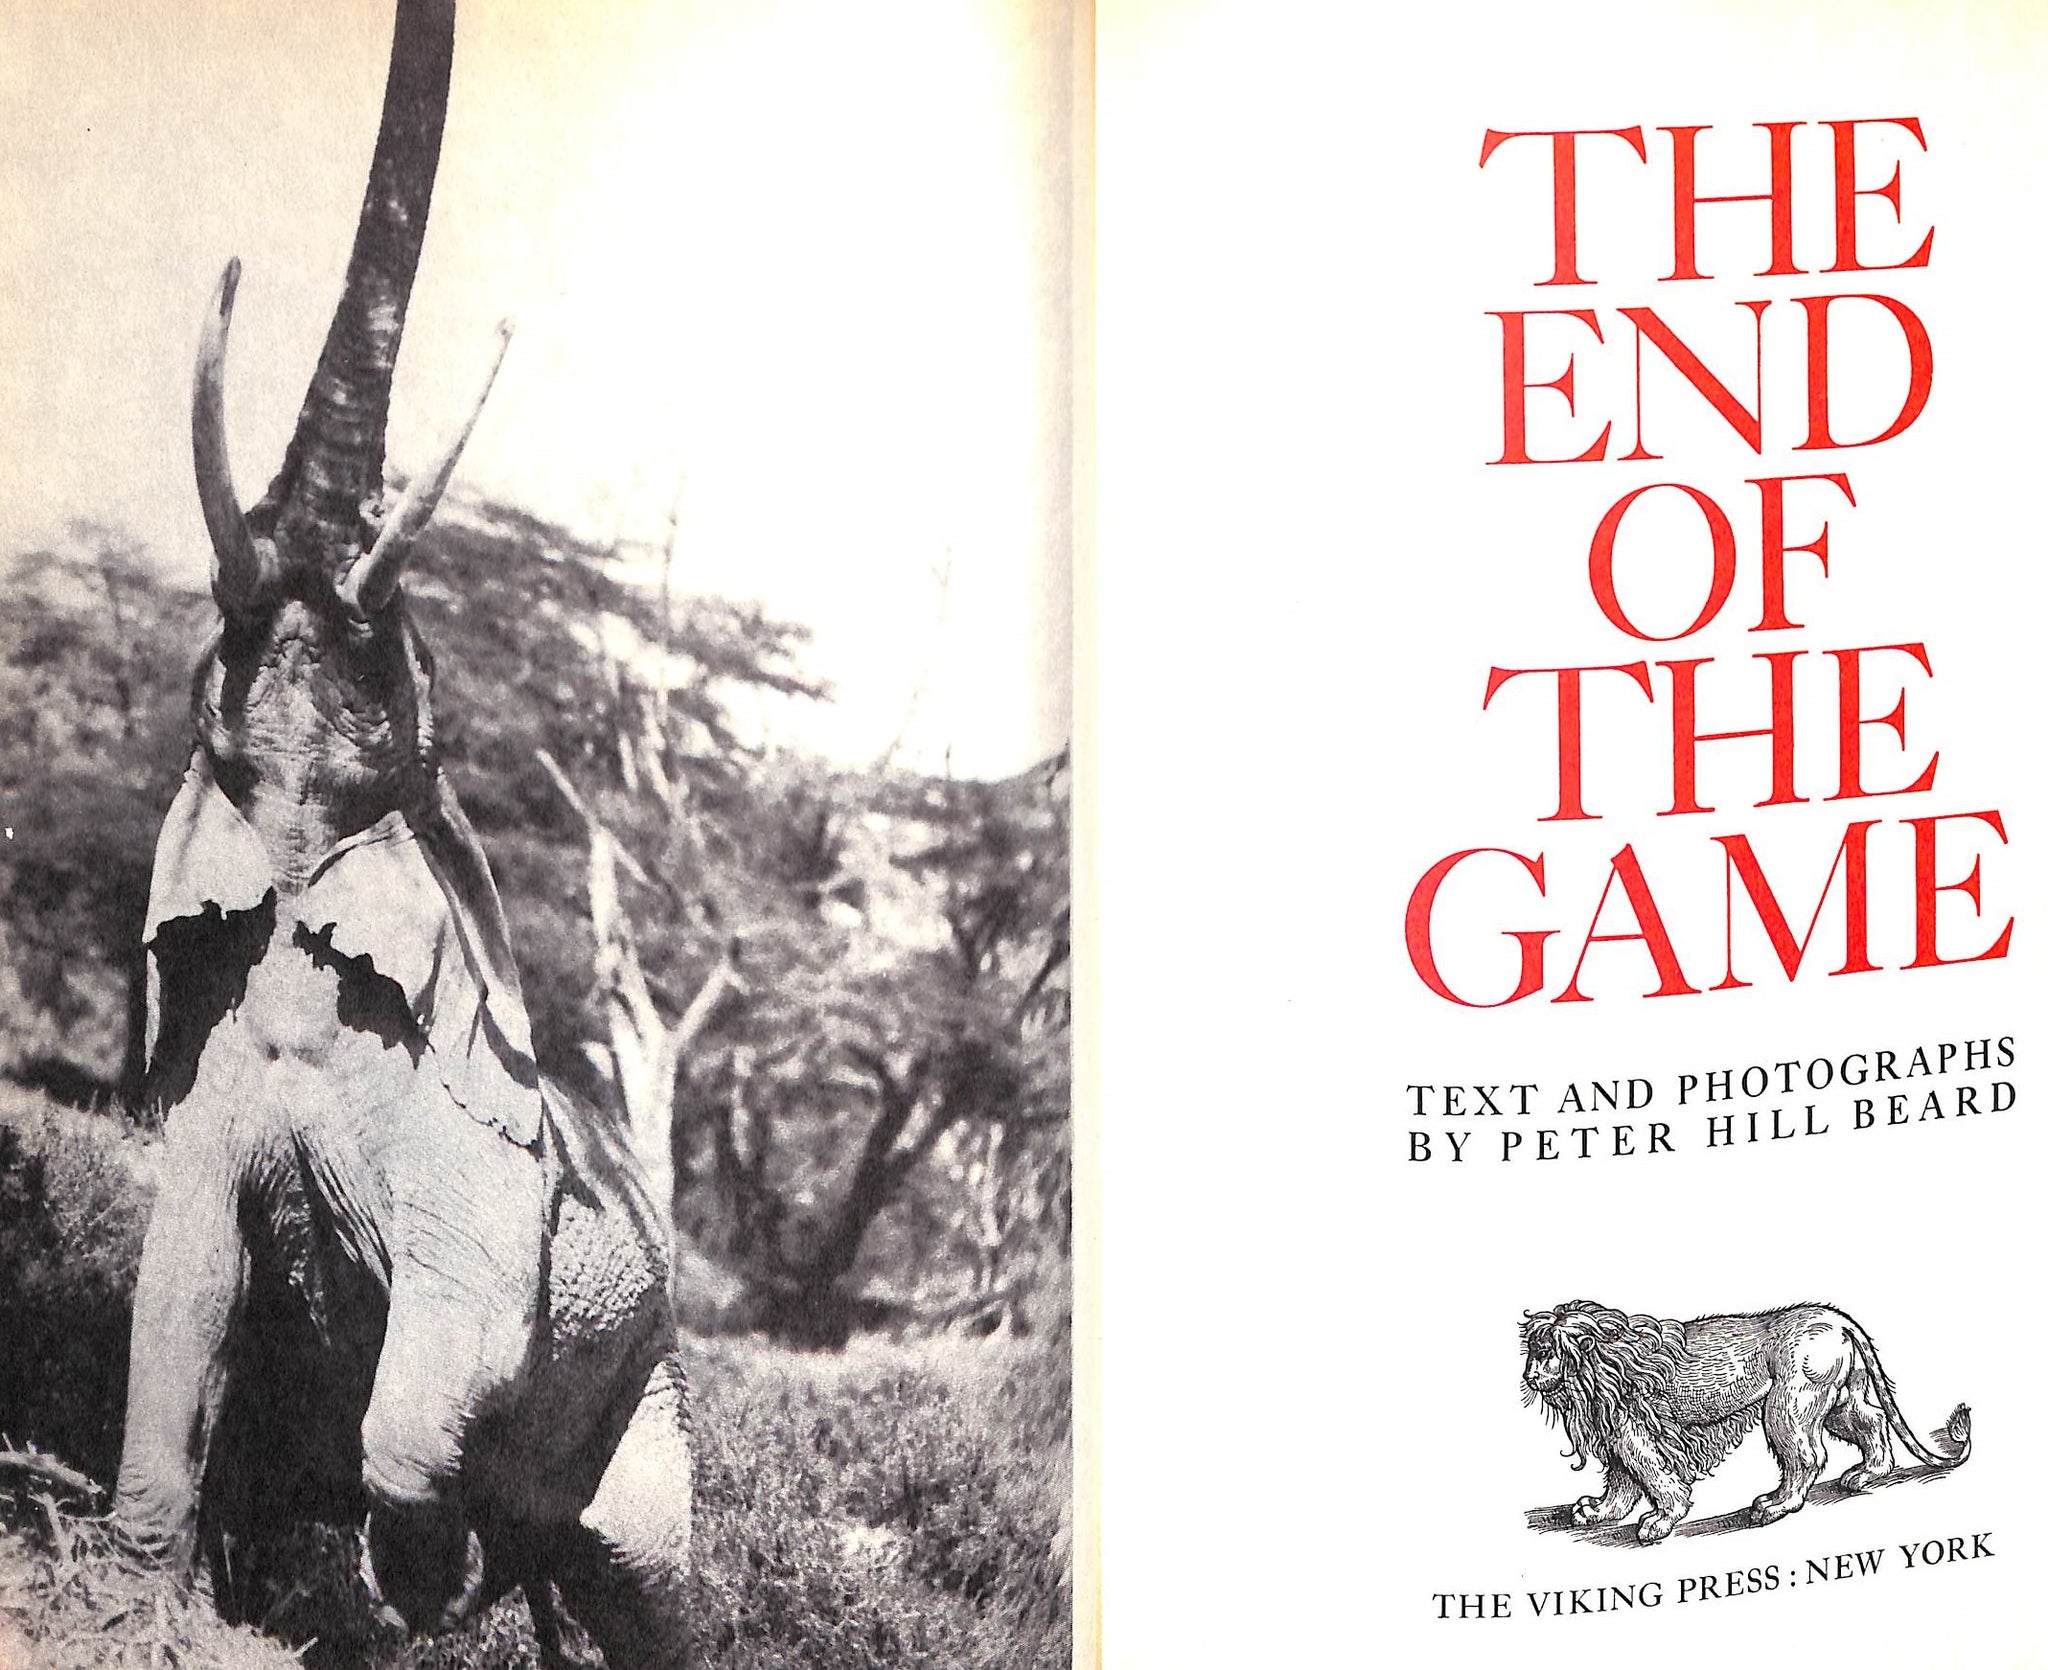 The End of the Game 1965 by Peter Hill Beard